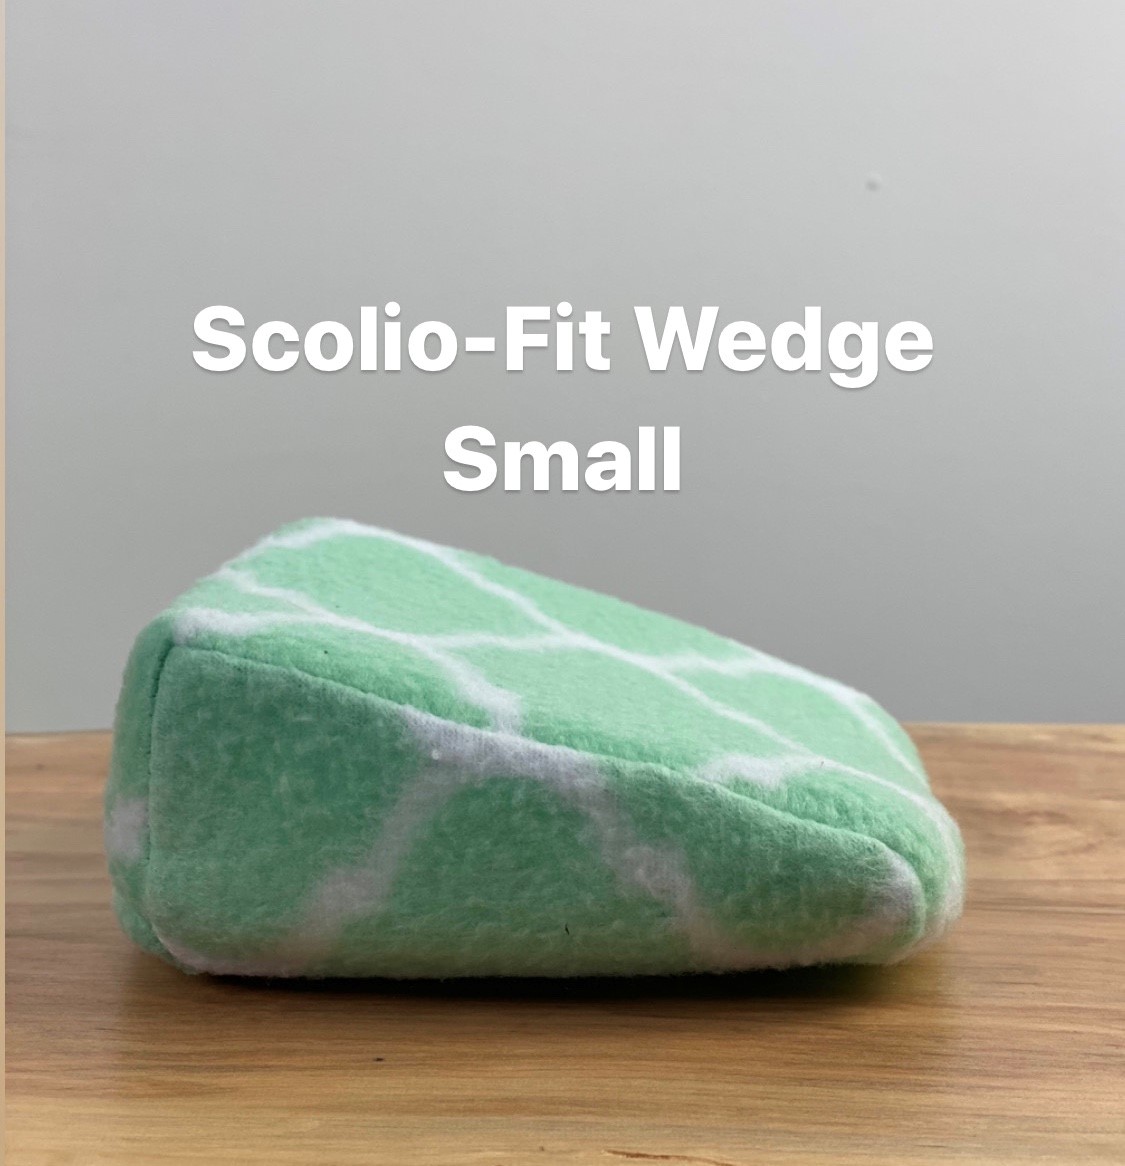 https://osteopilates.com/wp-content/uploads/2020/08/Scolio-Fit-Wedge-Small.jpg